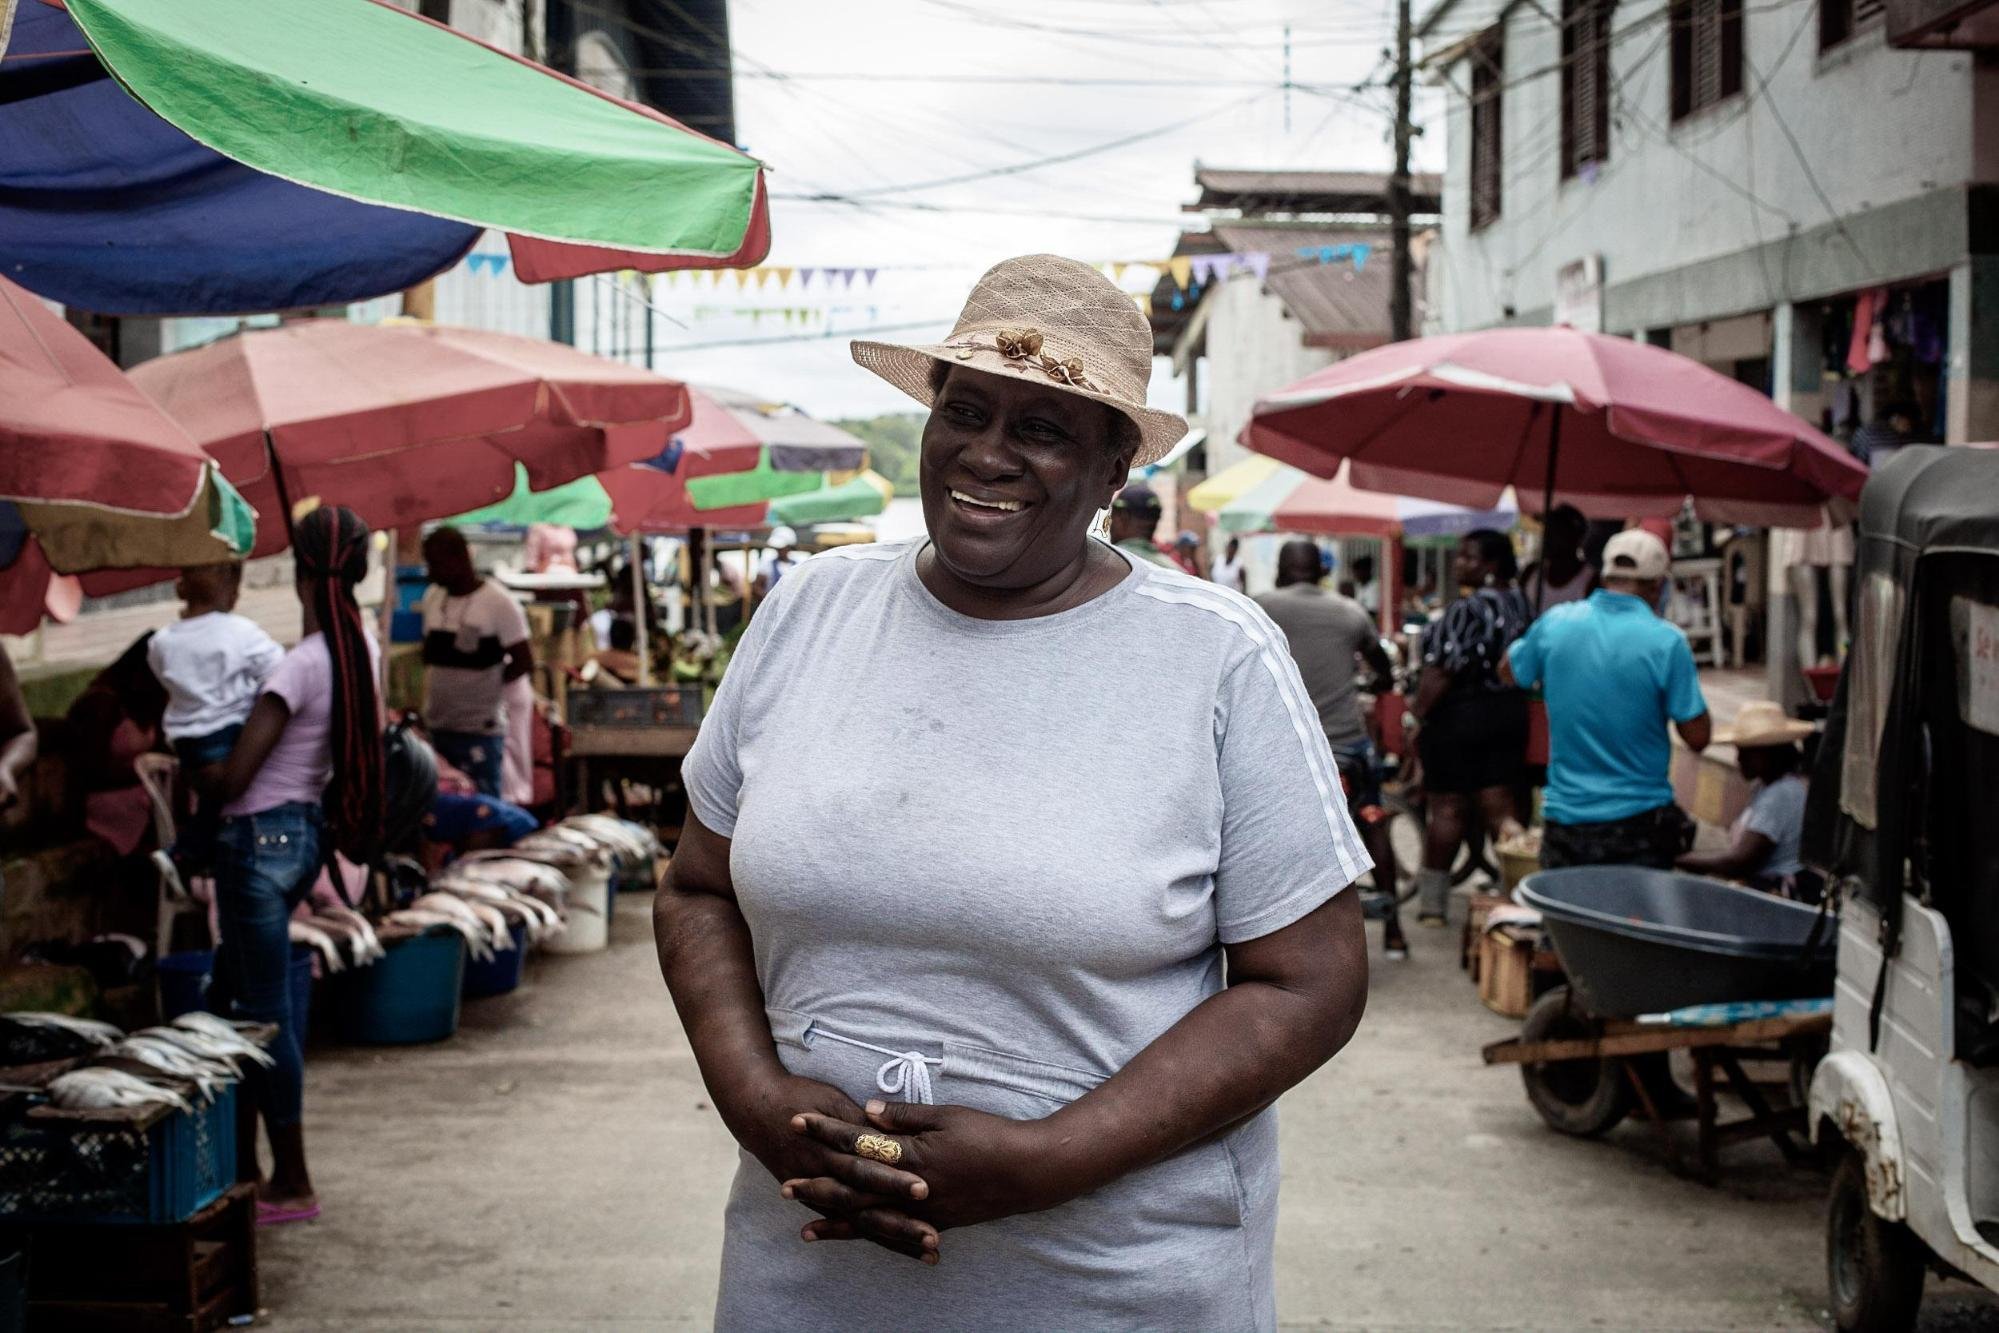   Teófila Betancourt is a local pillar for women, Black identity and Pacífico’s culture. Tall and smiling under a white hat, her thin voice serves as a steady vehicle for a solid string of ideas on womanhood, blackness, food, life and land. June 17, 